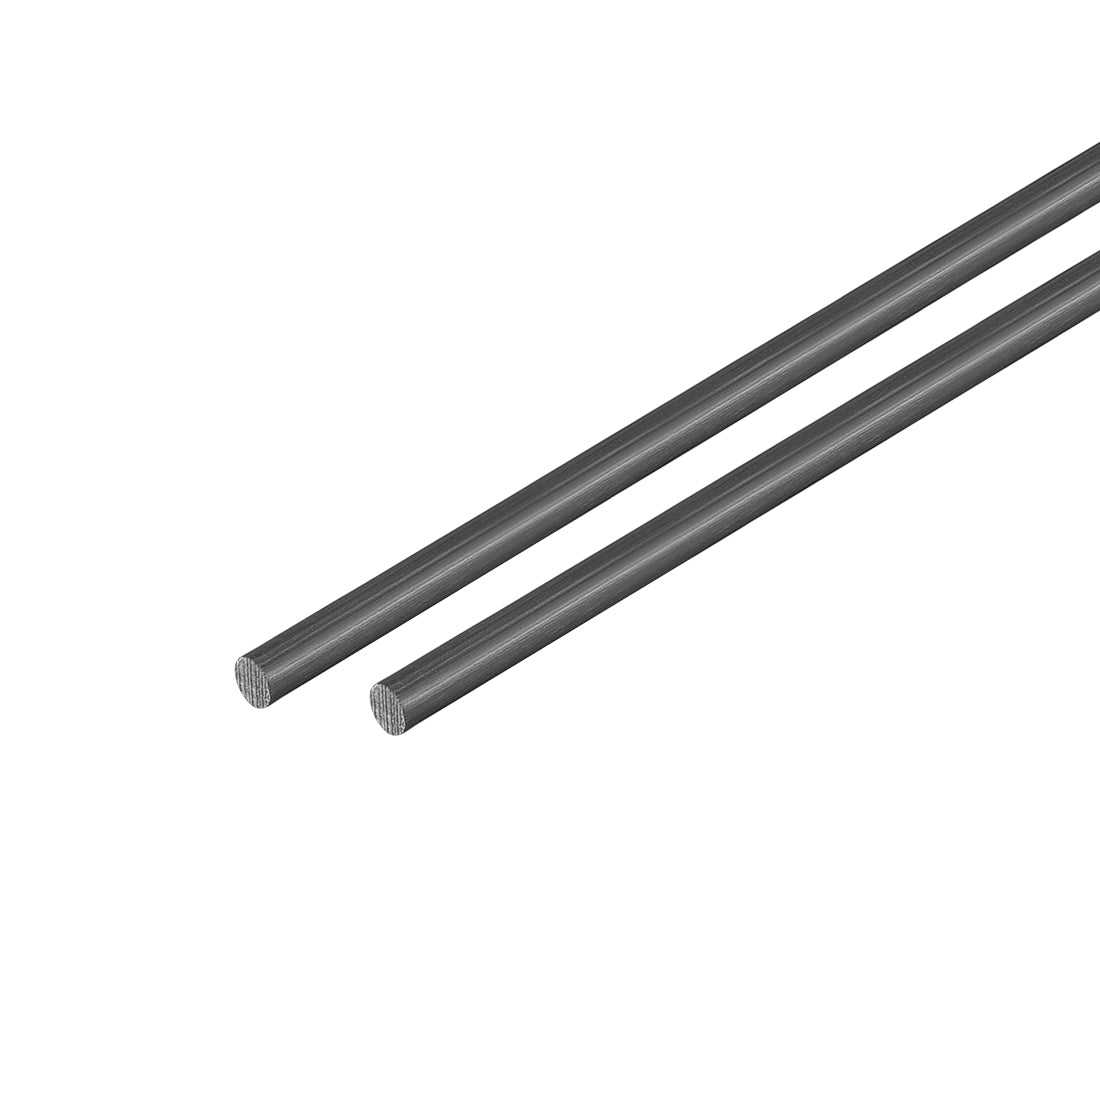 Uxcell Uxcell Carbon Fiber Rod 6mm, 500mm/19.6inch Length for RC Airplane Matte Pole, 2pcs